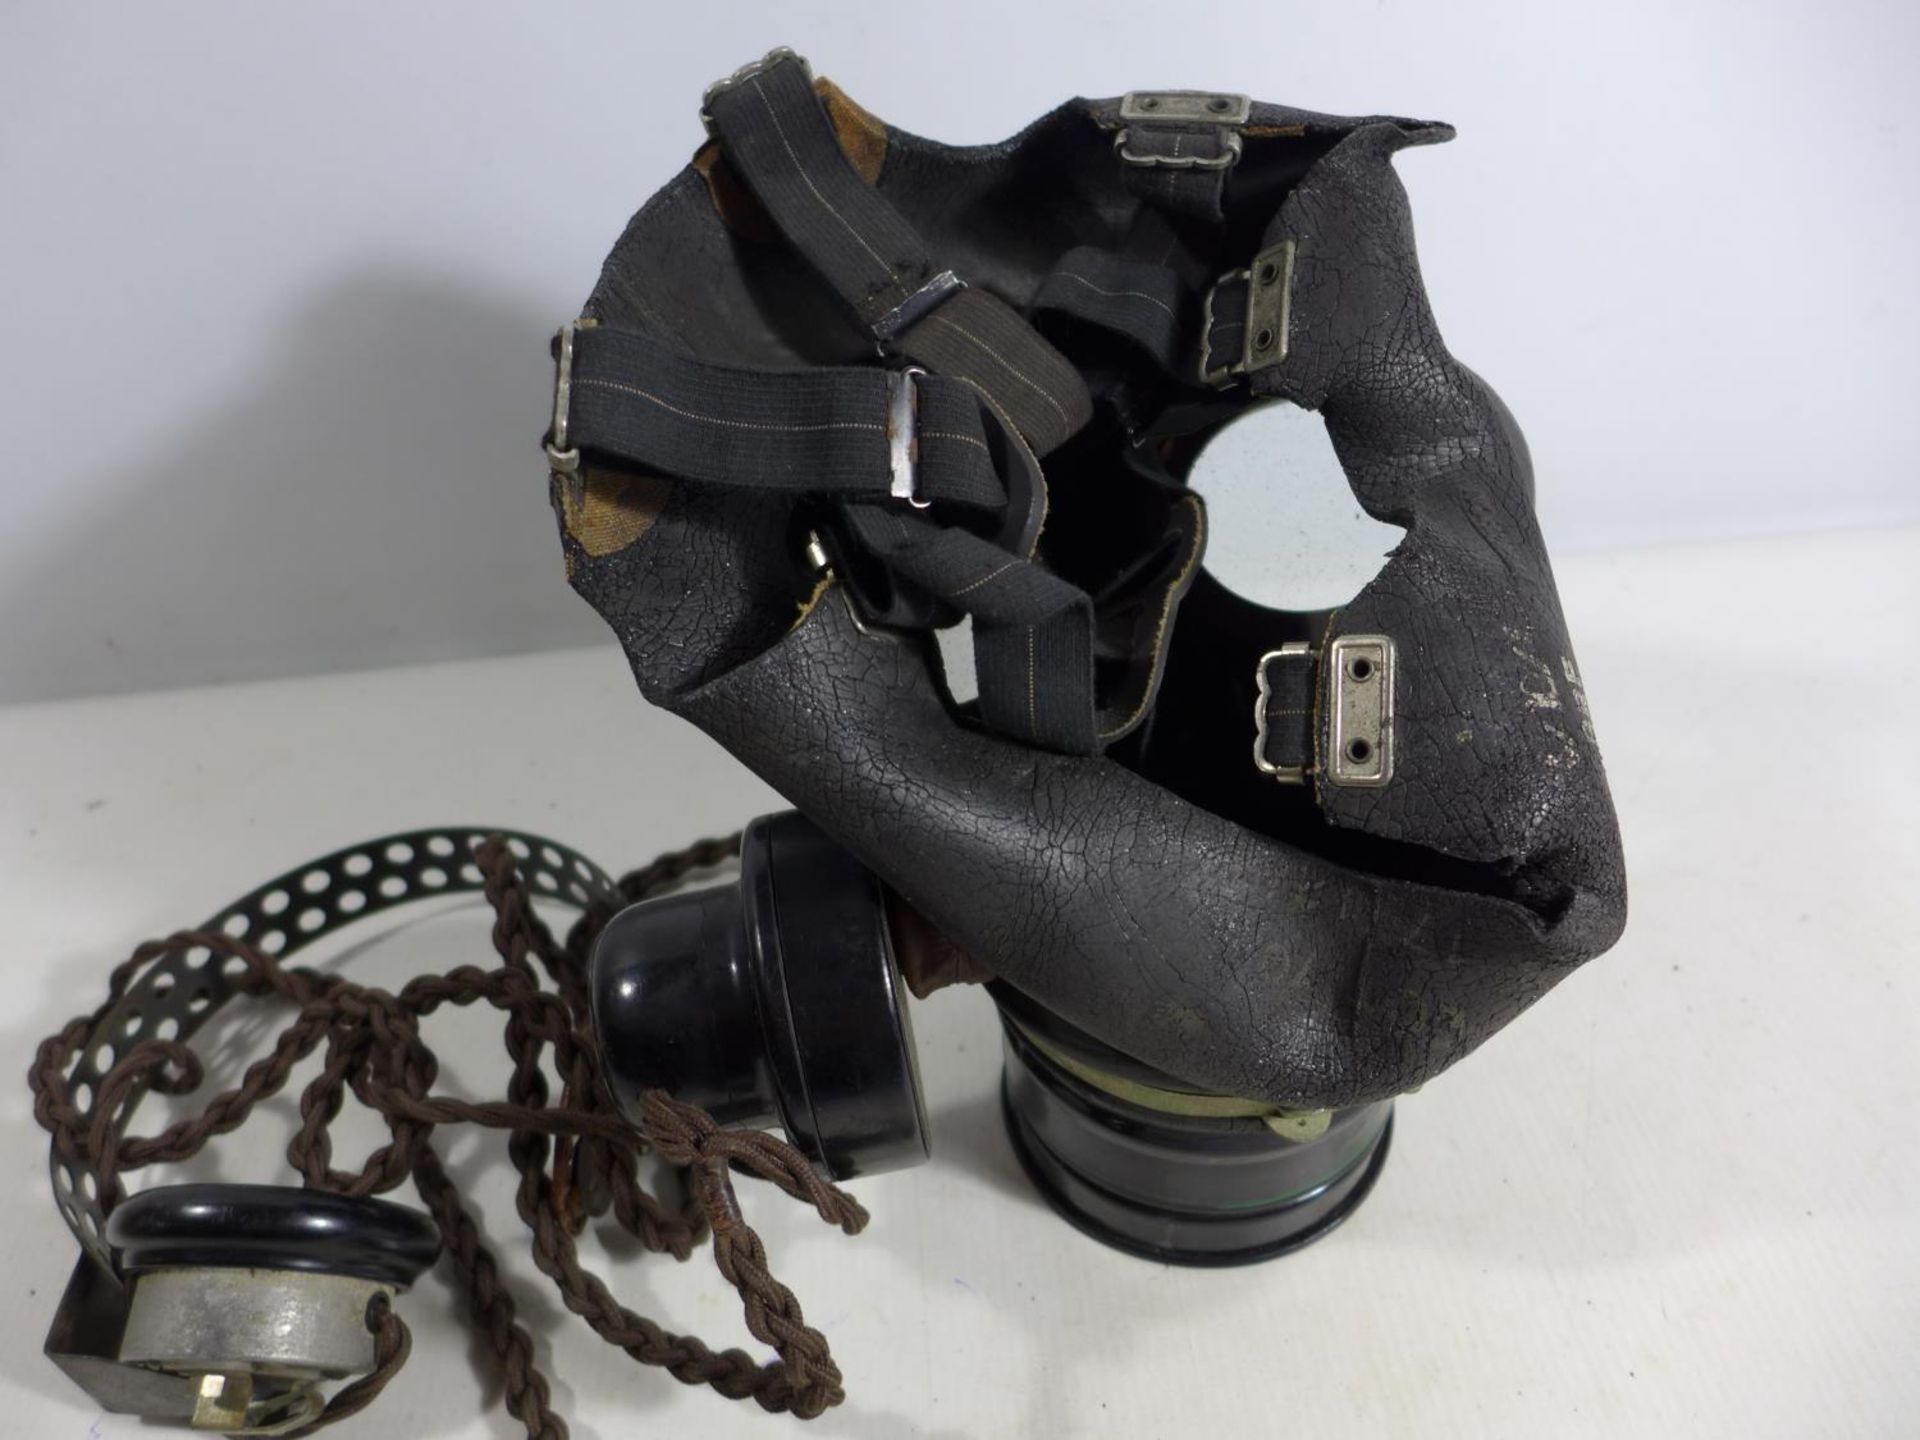 A RARE WORLD WAR II GAS MASK WITH INTEGRAL HEADSET AND MICROPHONE - Image 4 of 4